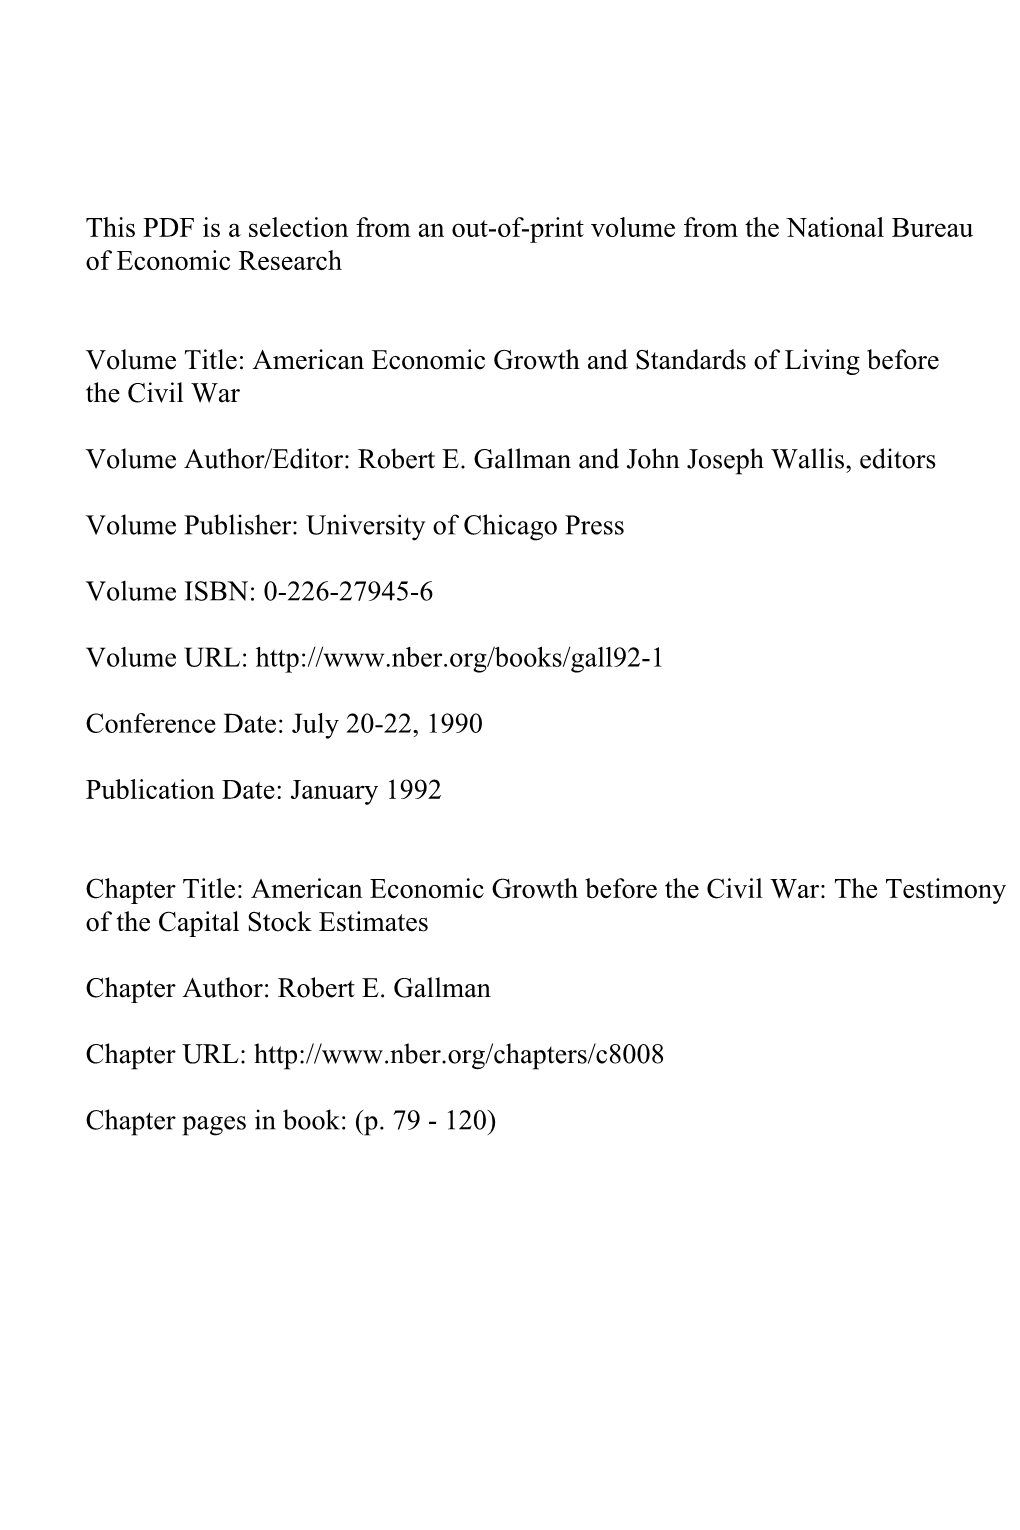 American Economic Growth Before the Civil War: the Testimony of the Capital Stock Estimates